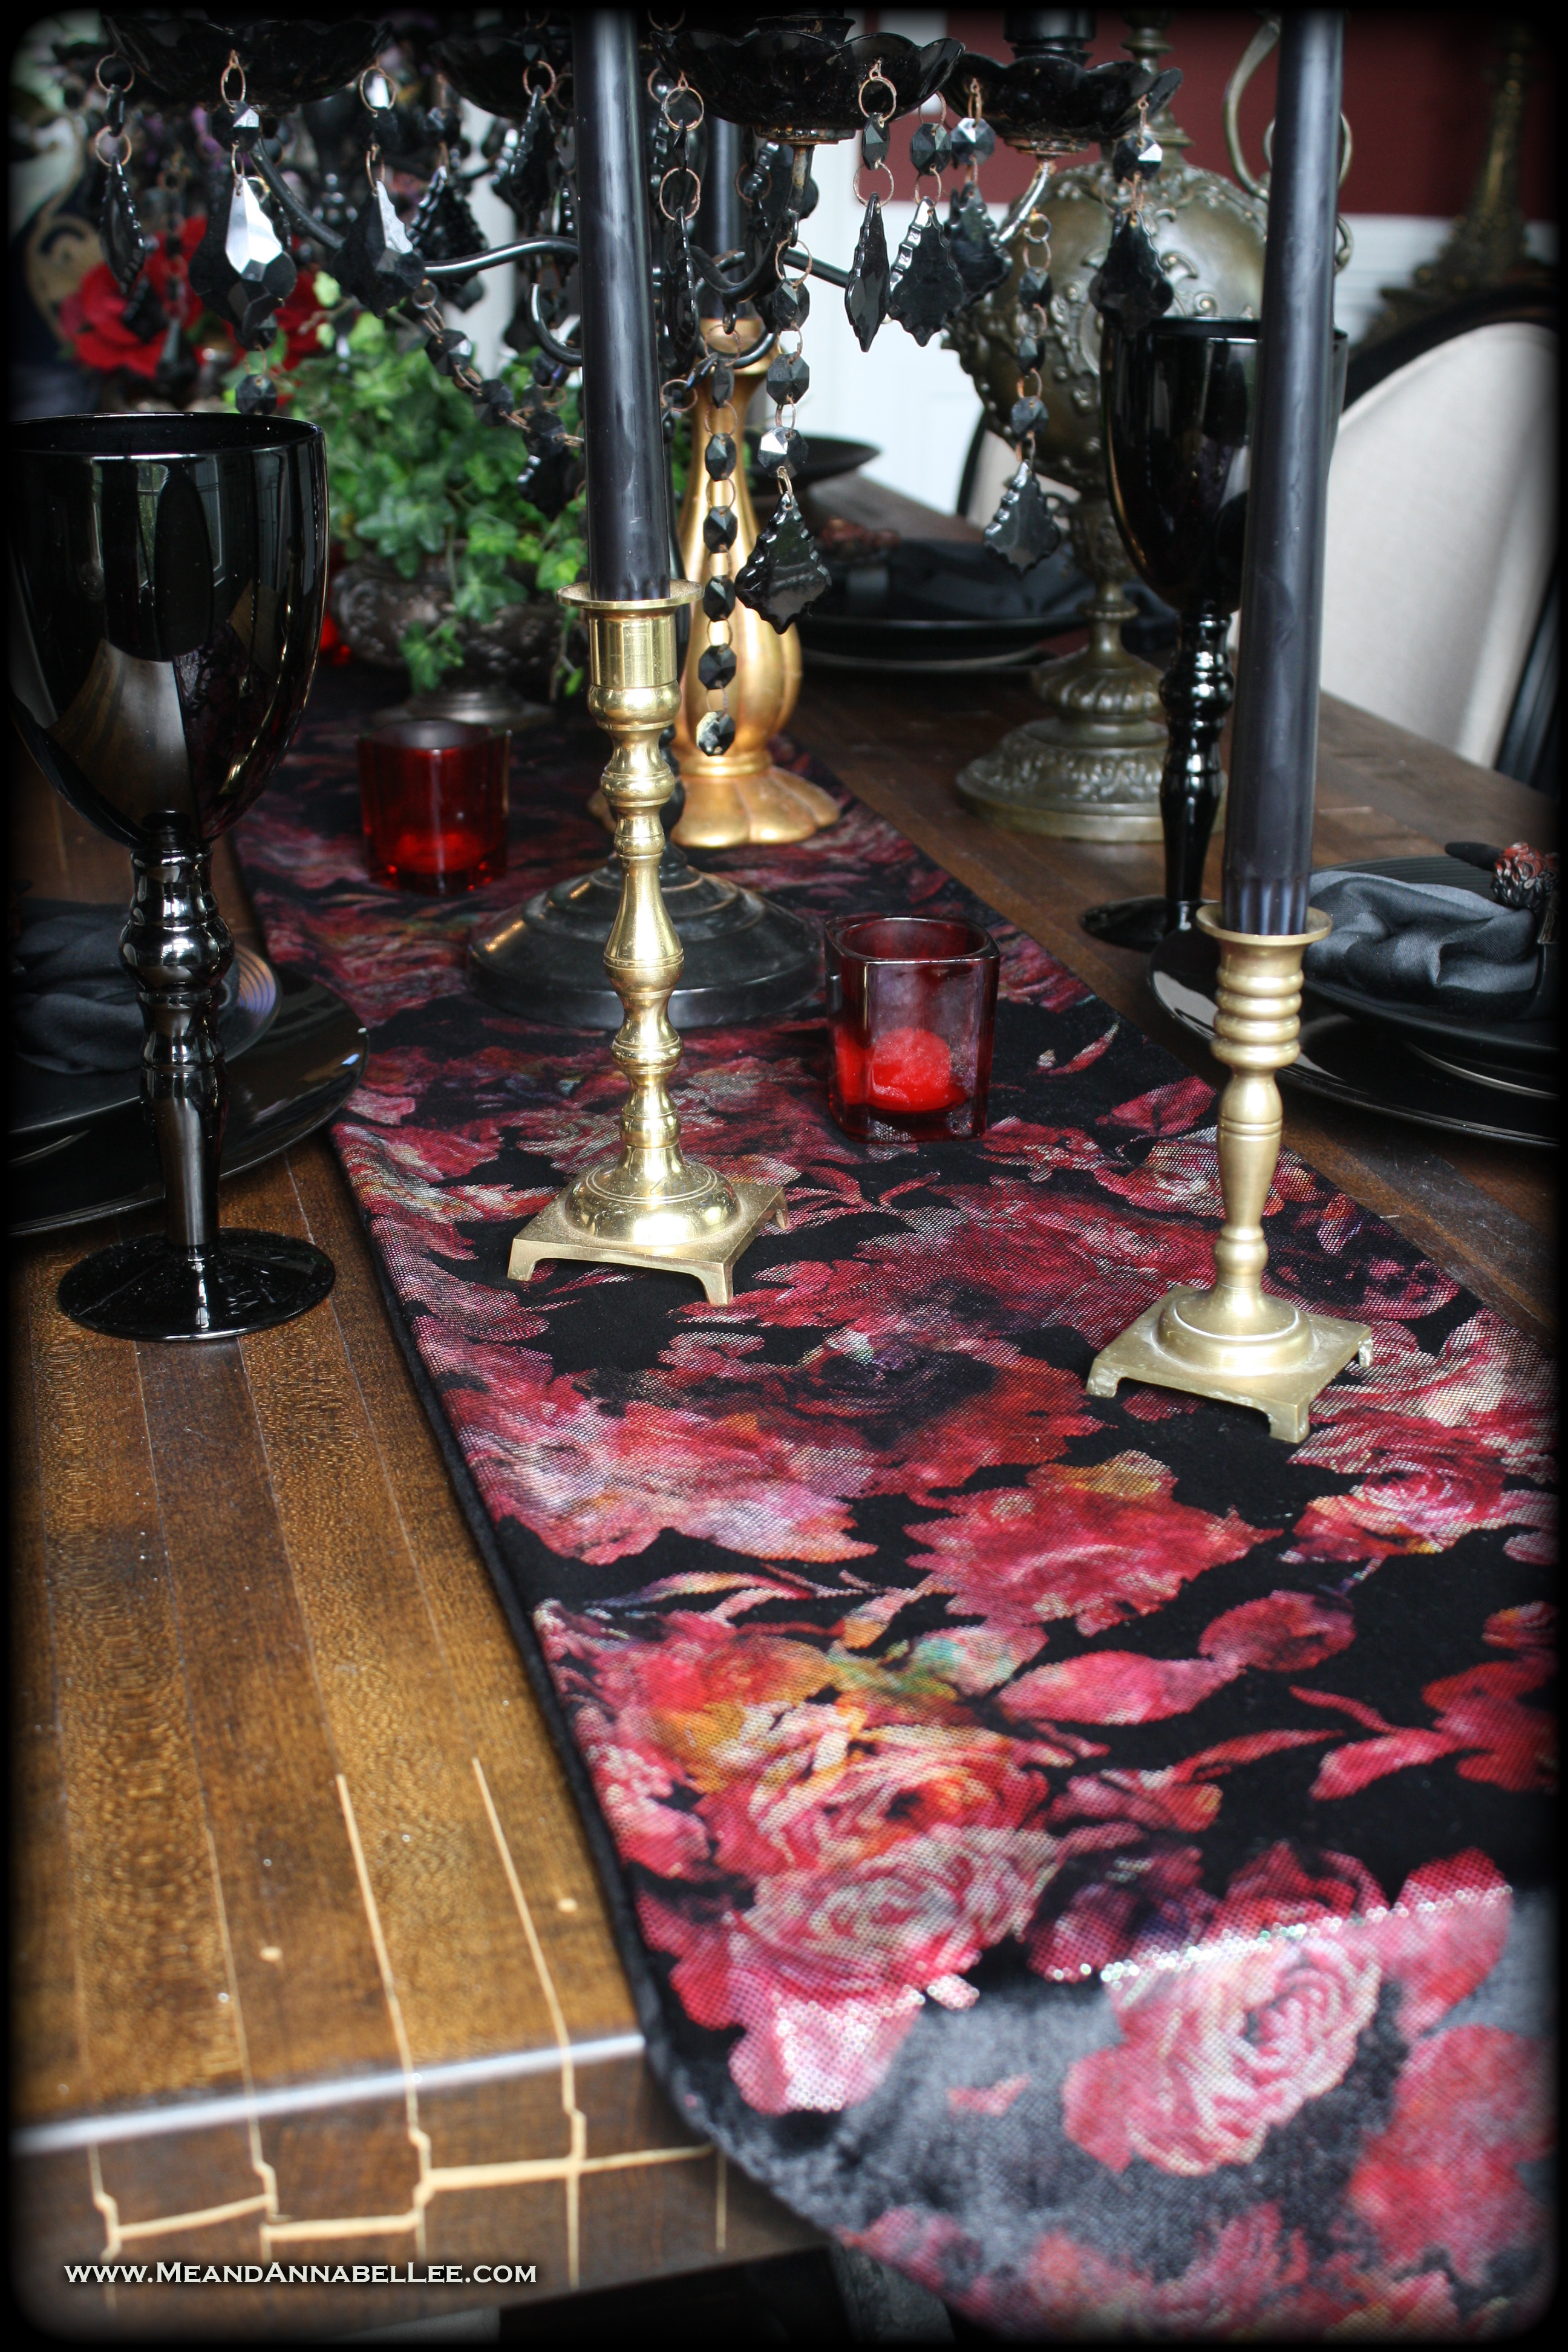 How to Make this DIY Double Sided Victorian Gothic Table Runner | Metallic Black Red Velvet Roses | Goth Home Decor | Table Setting | www.MeandAnnabelLee.com